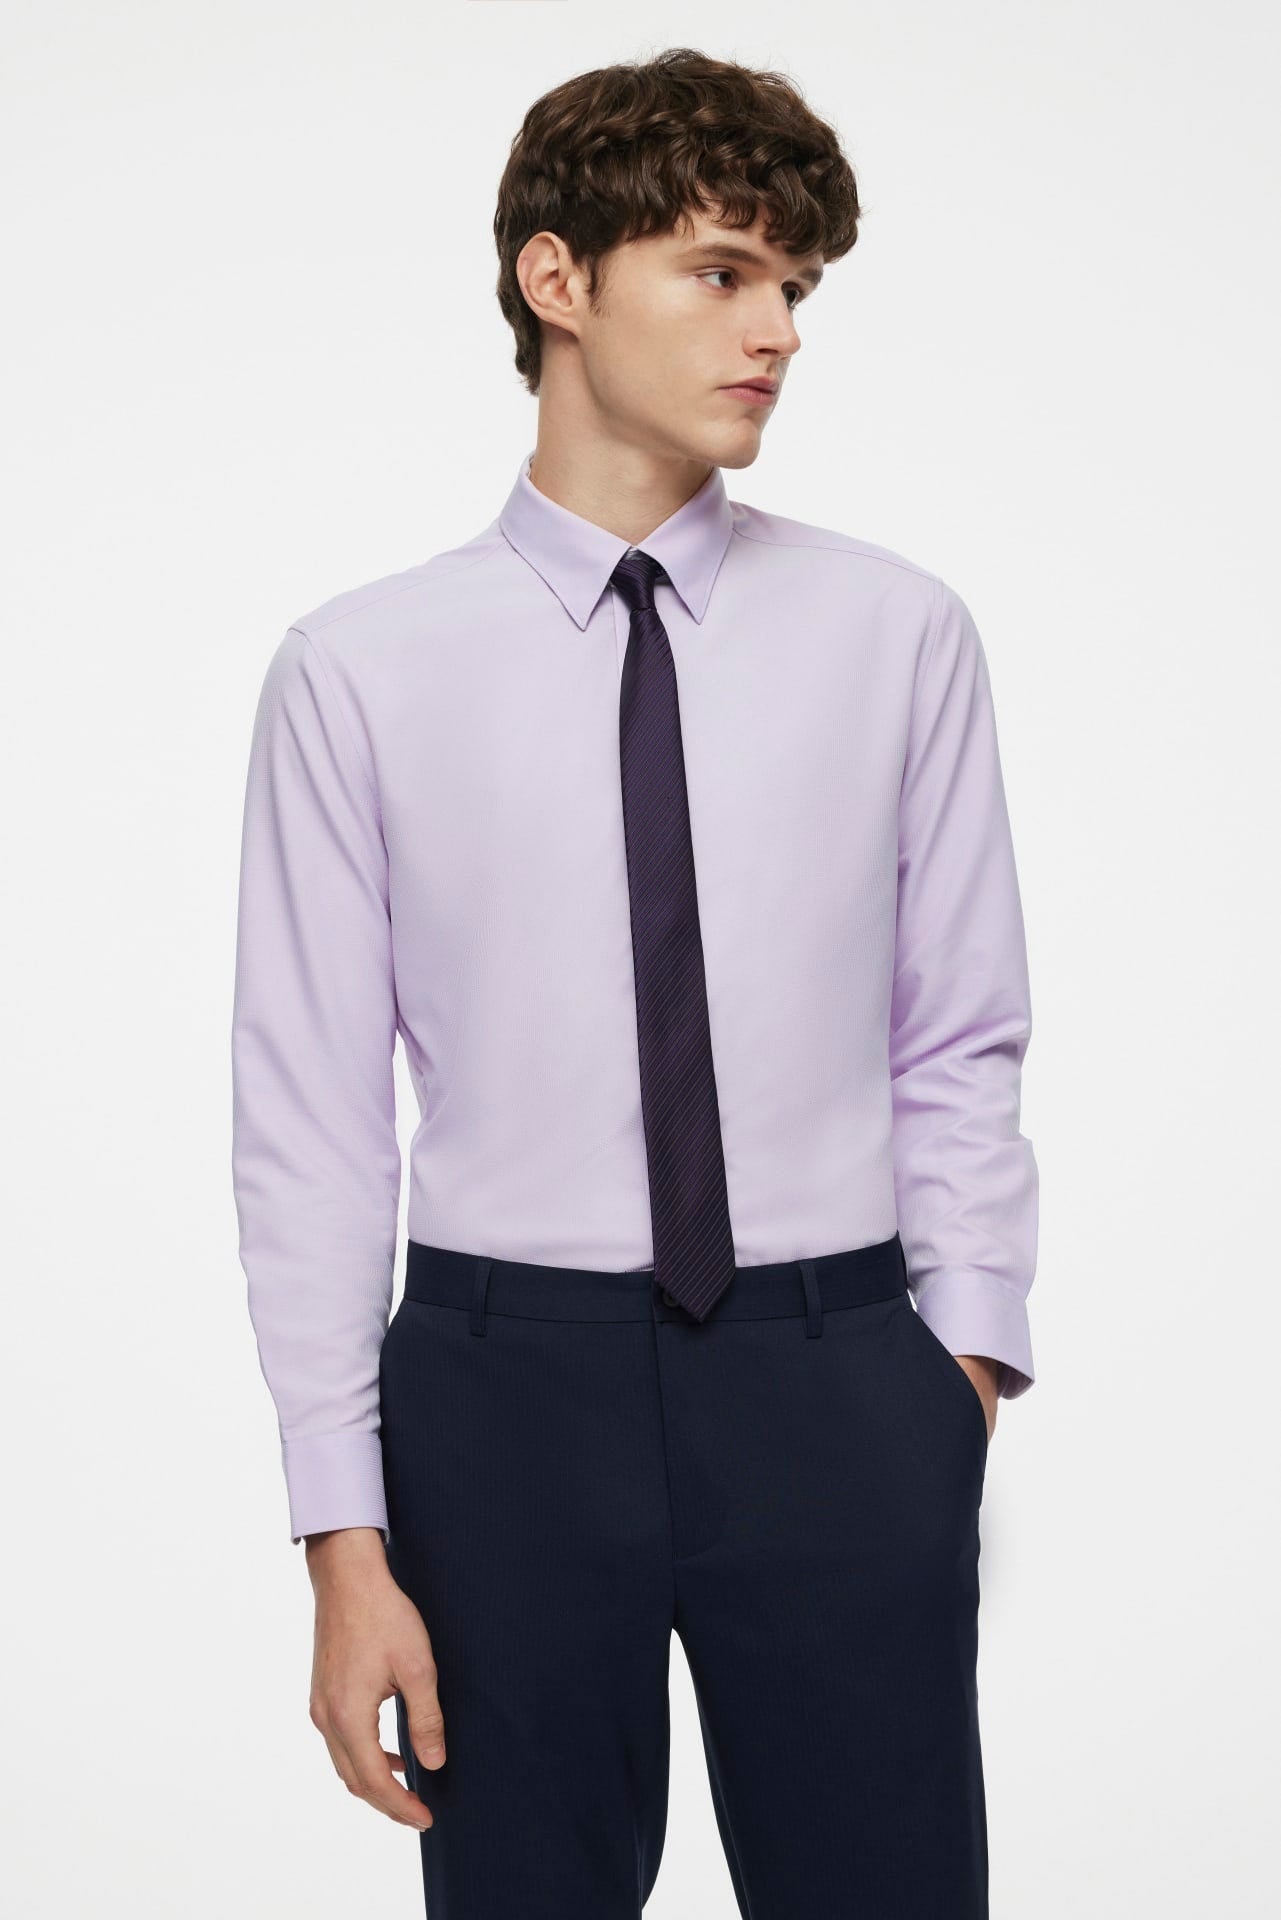 What Colour Shirts To Wear With Black Pants: 7 Foolproof Options